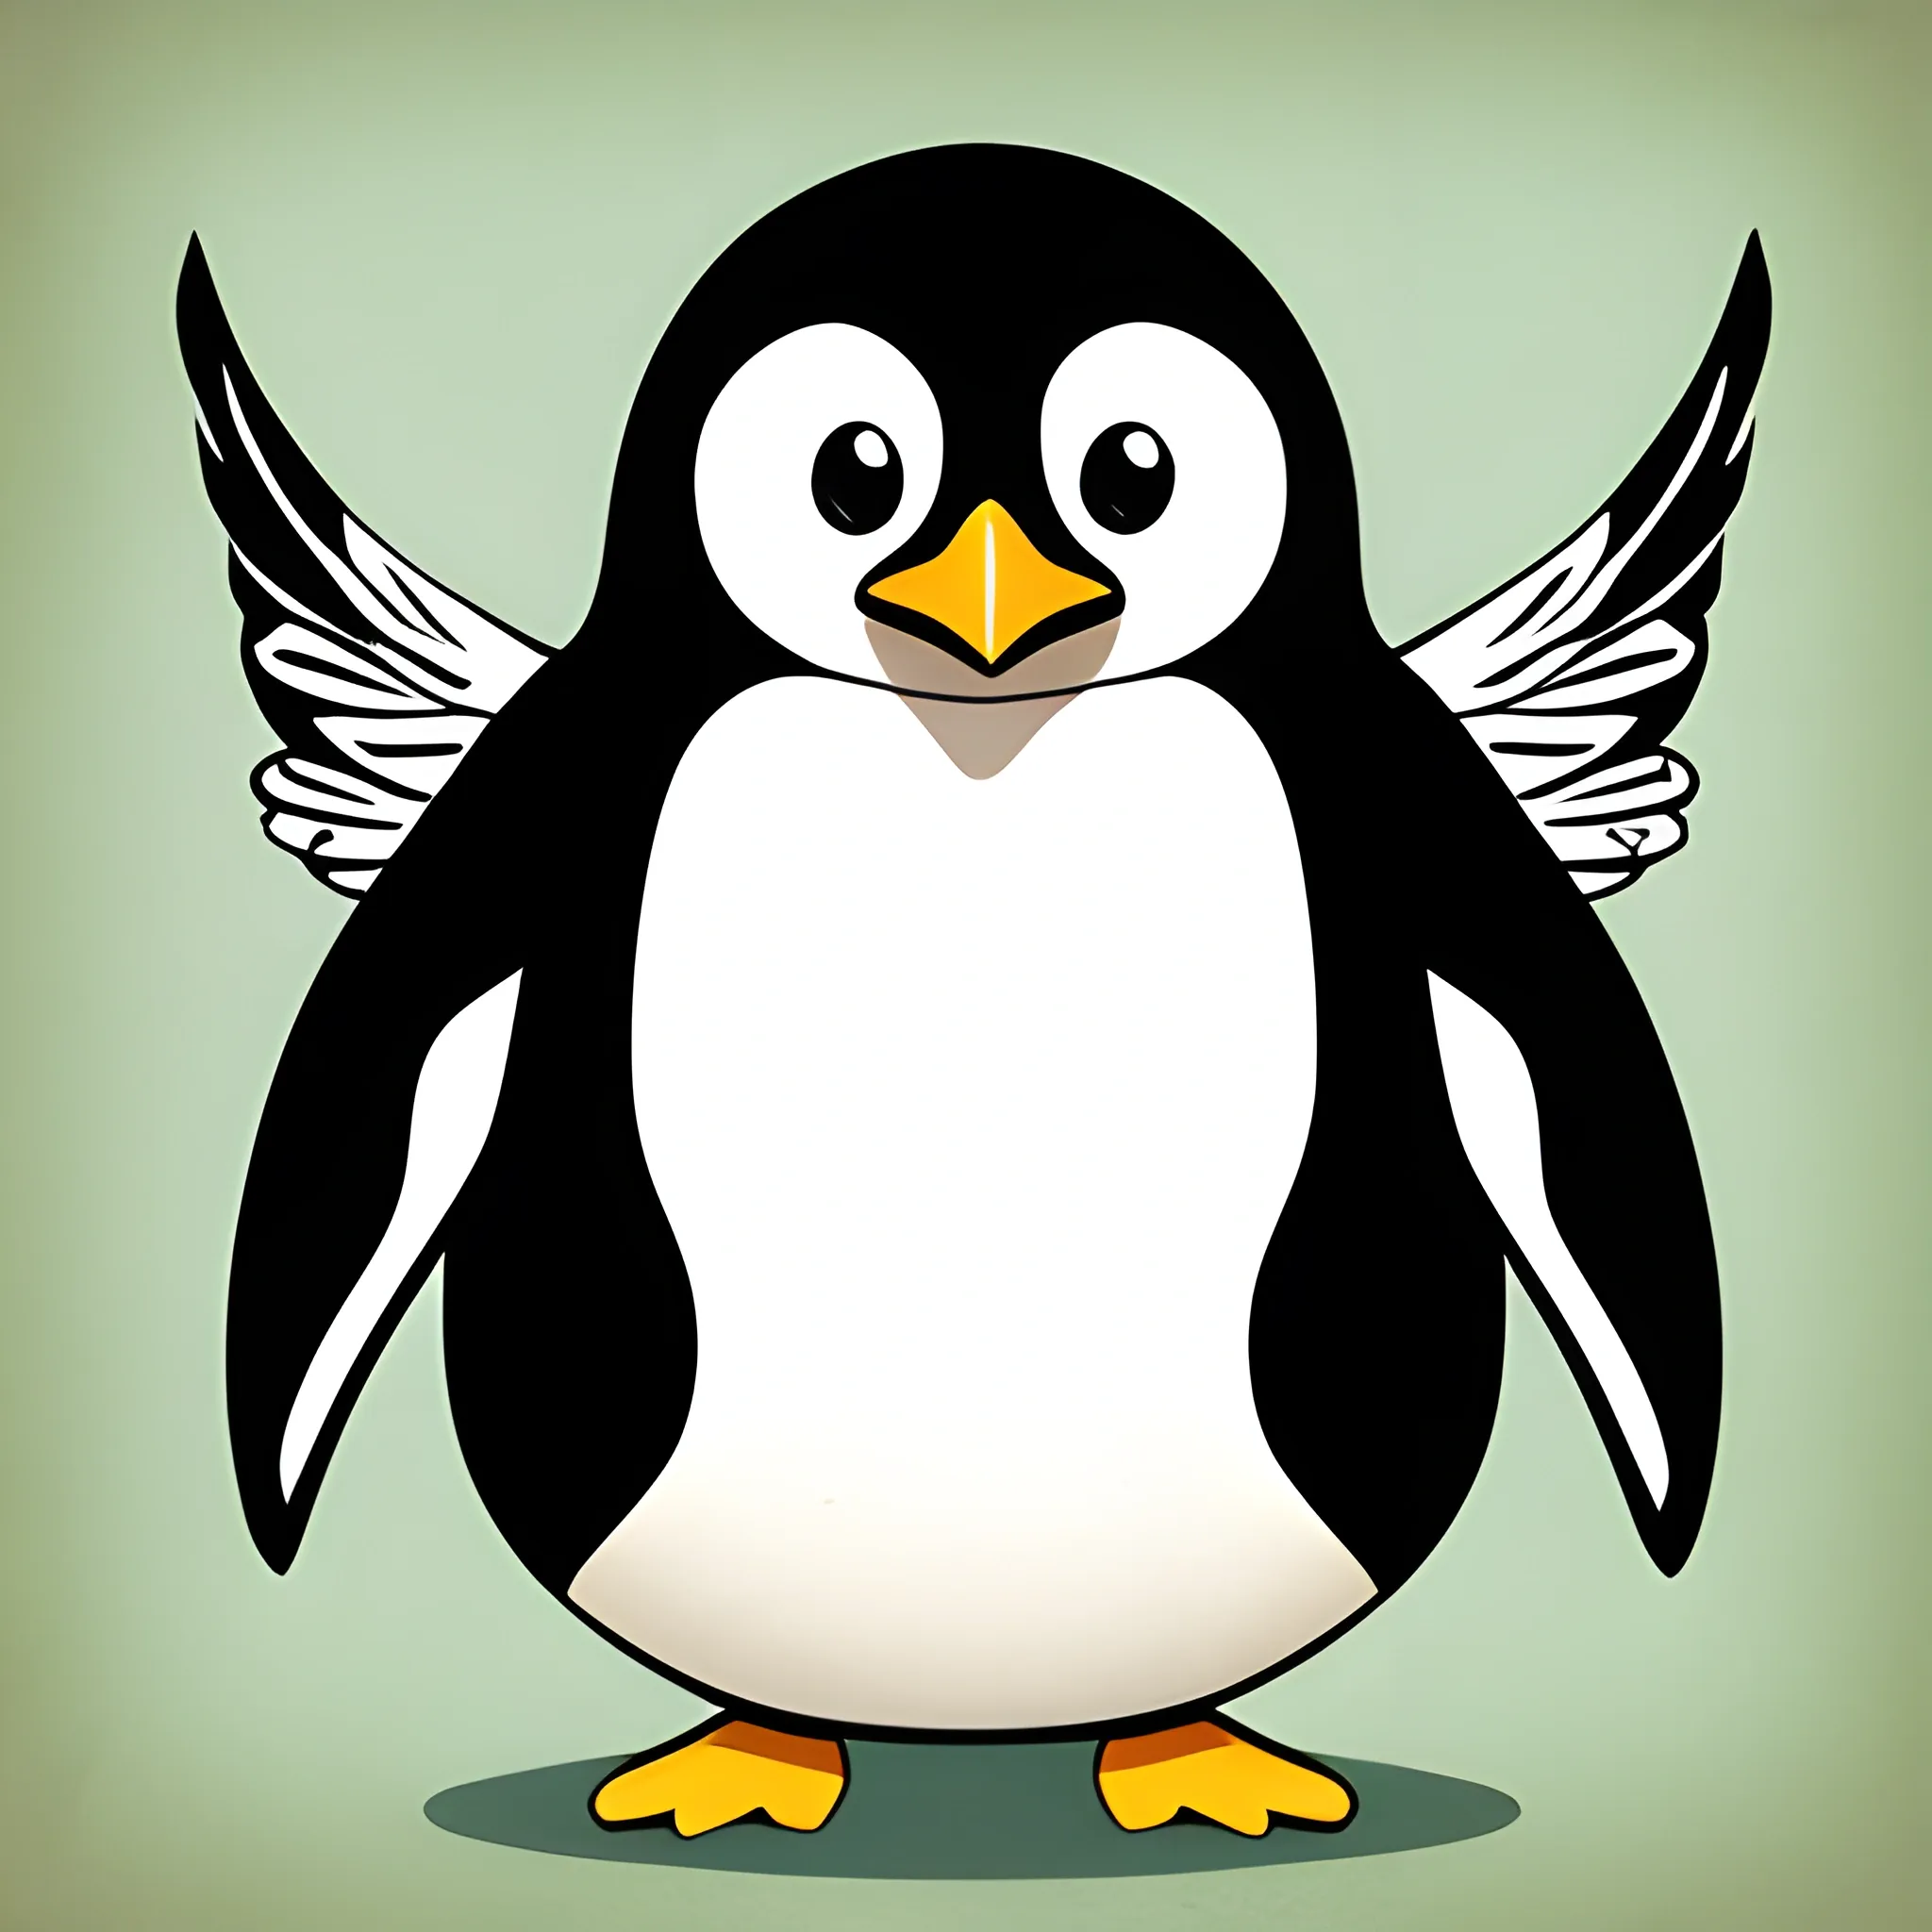 penguin with wings of butterfly, Cartoon